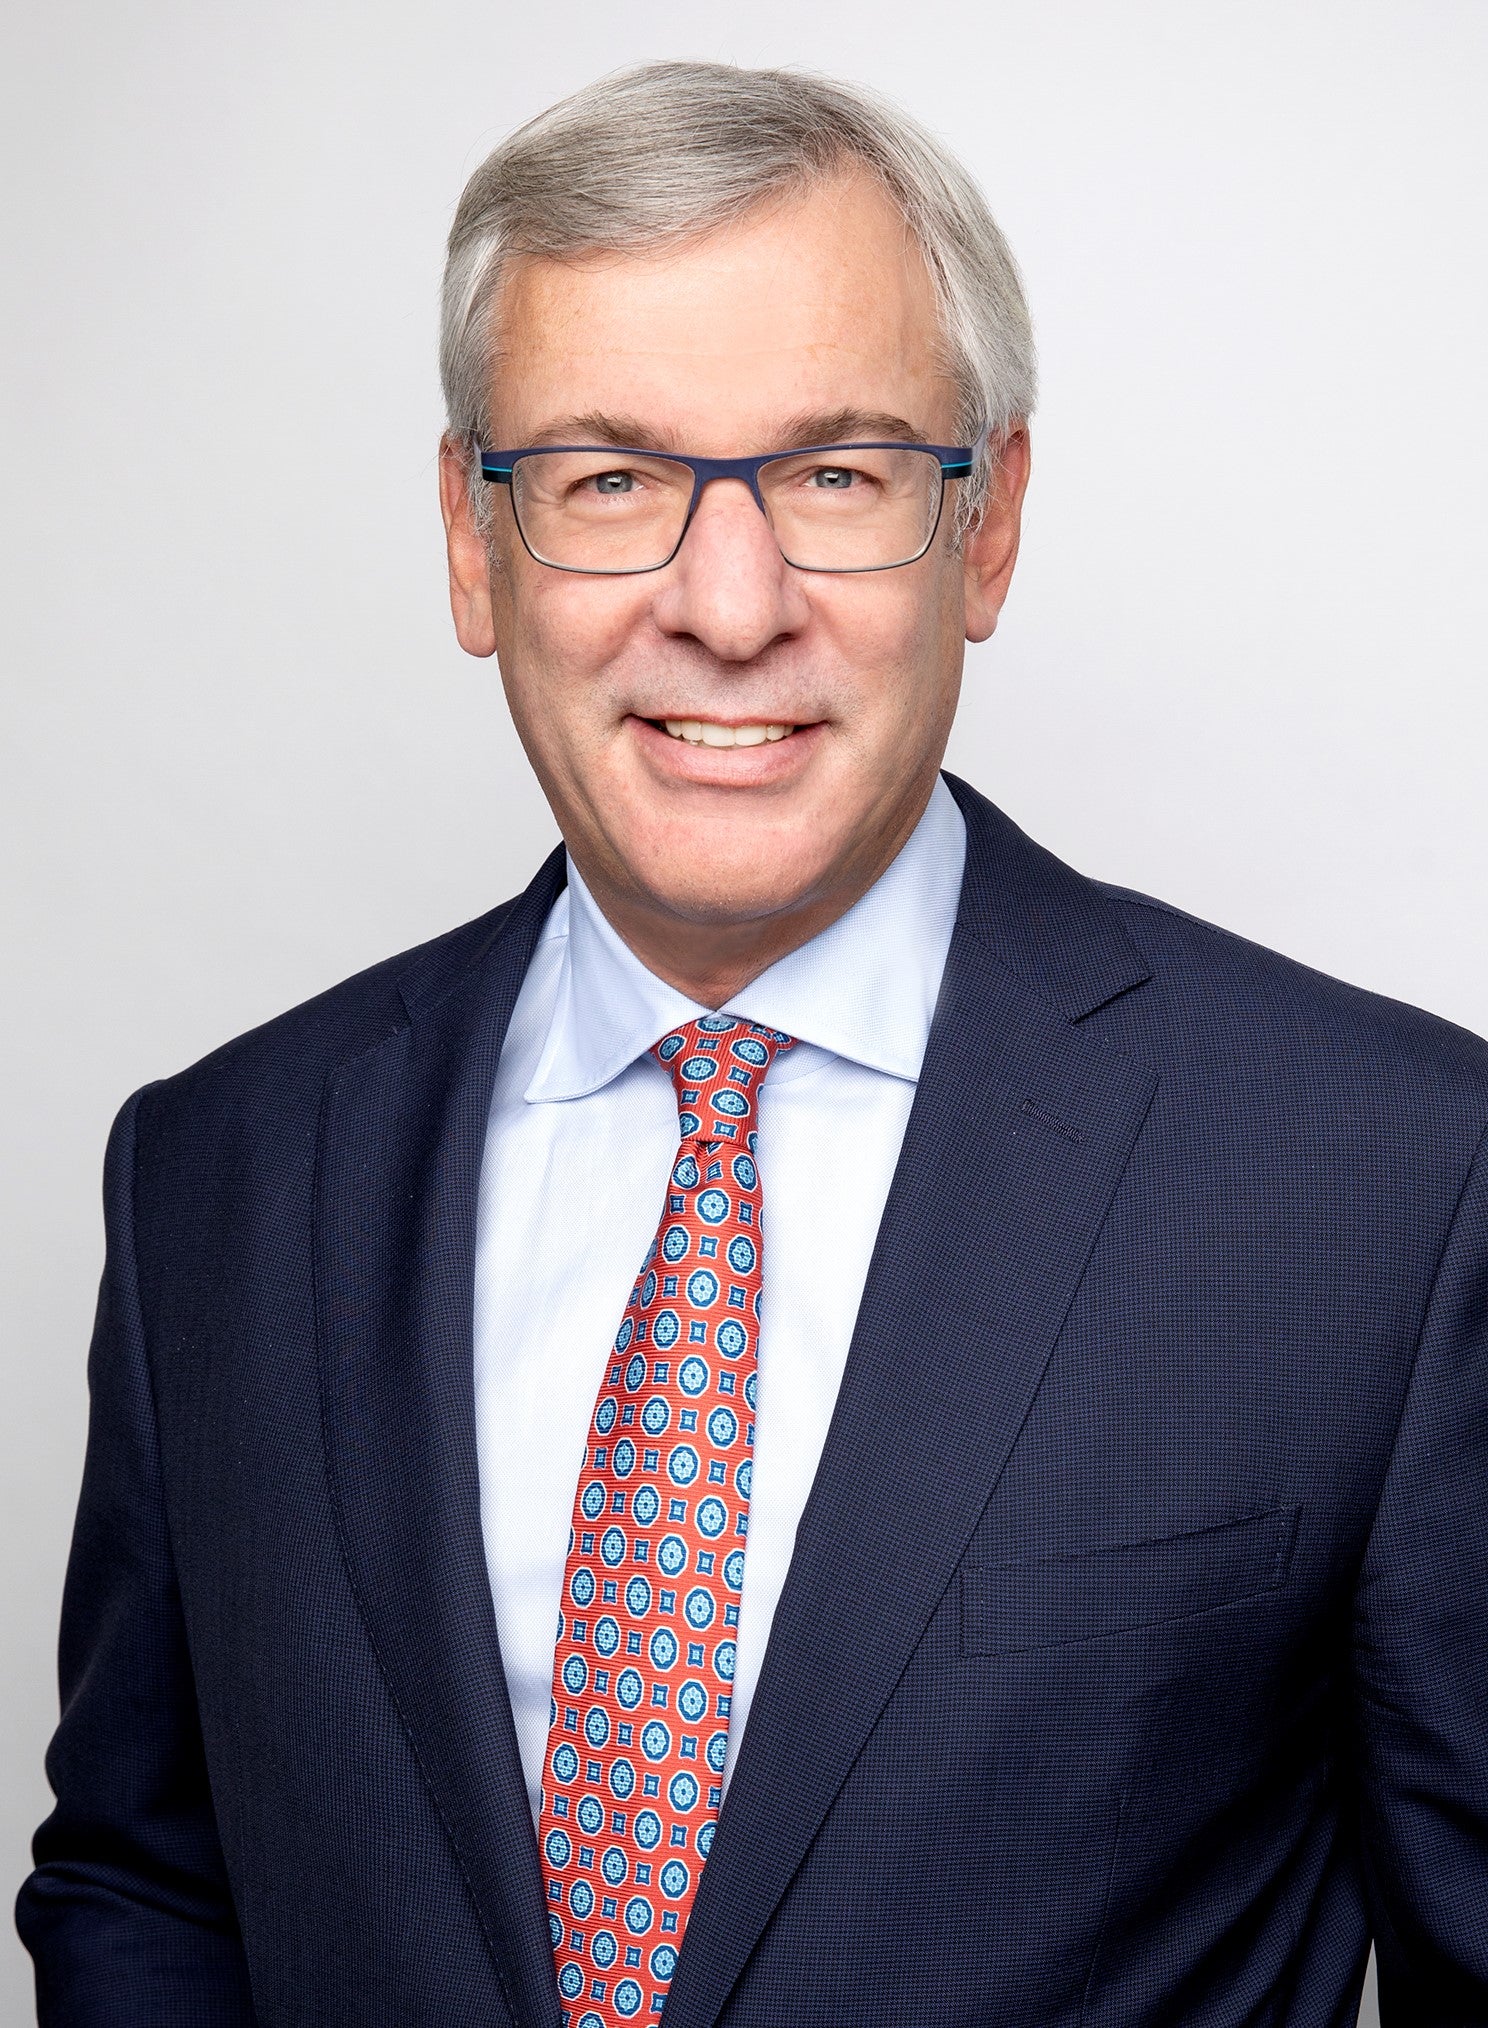 Photo of President and CEO of RBC, David McKay, smiling